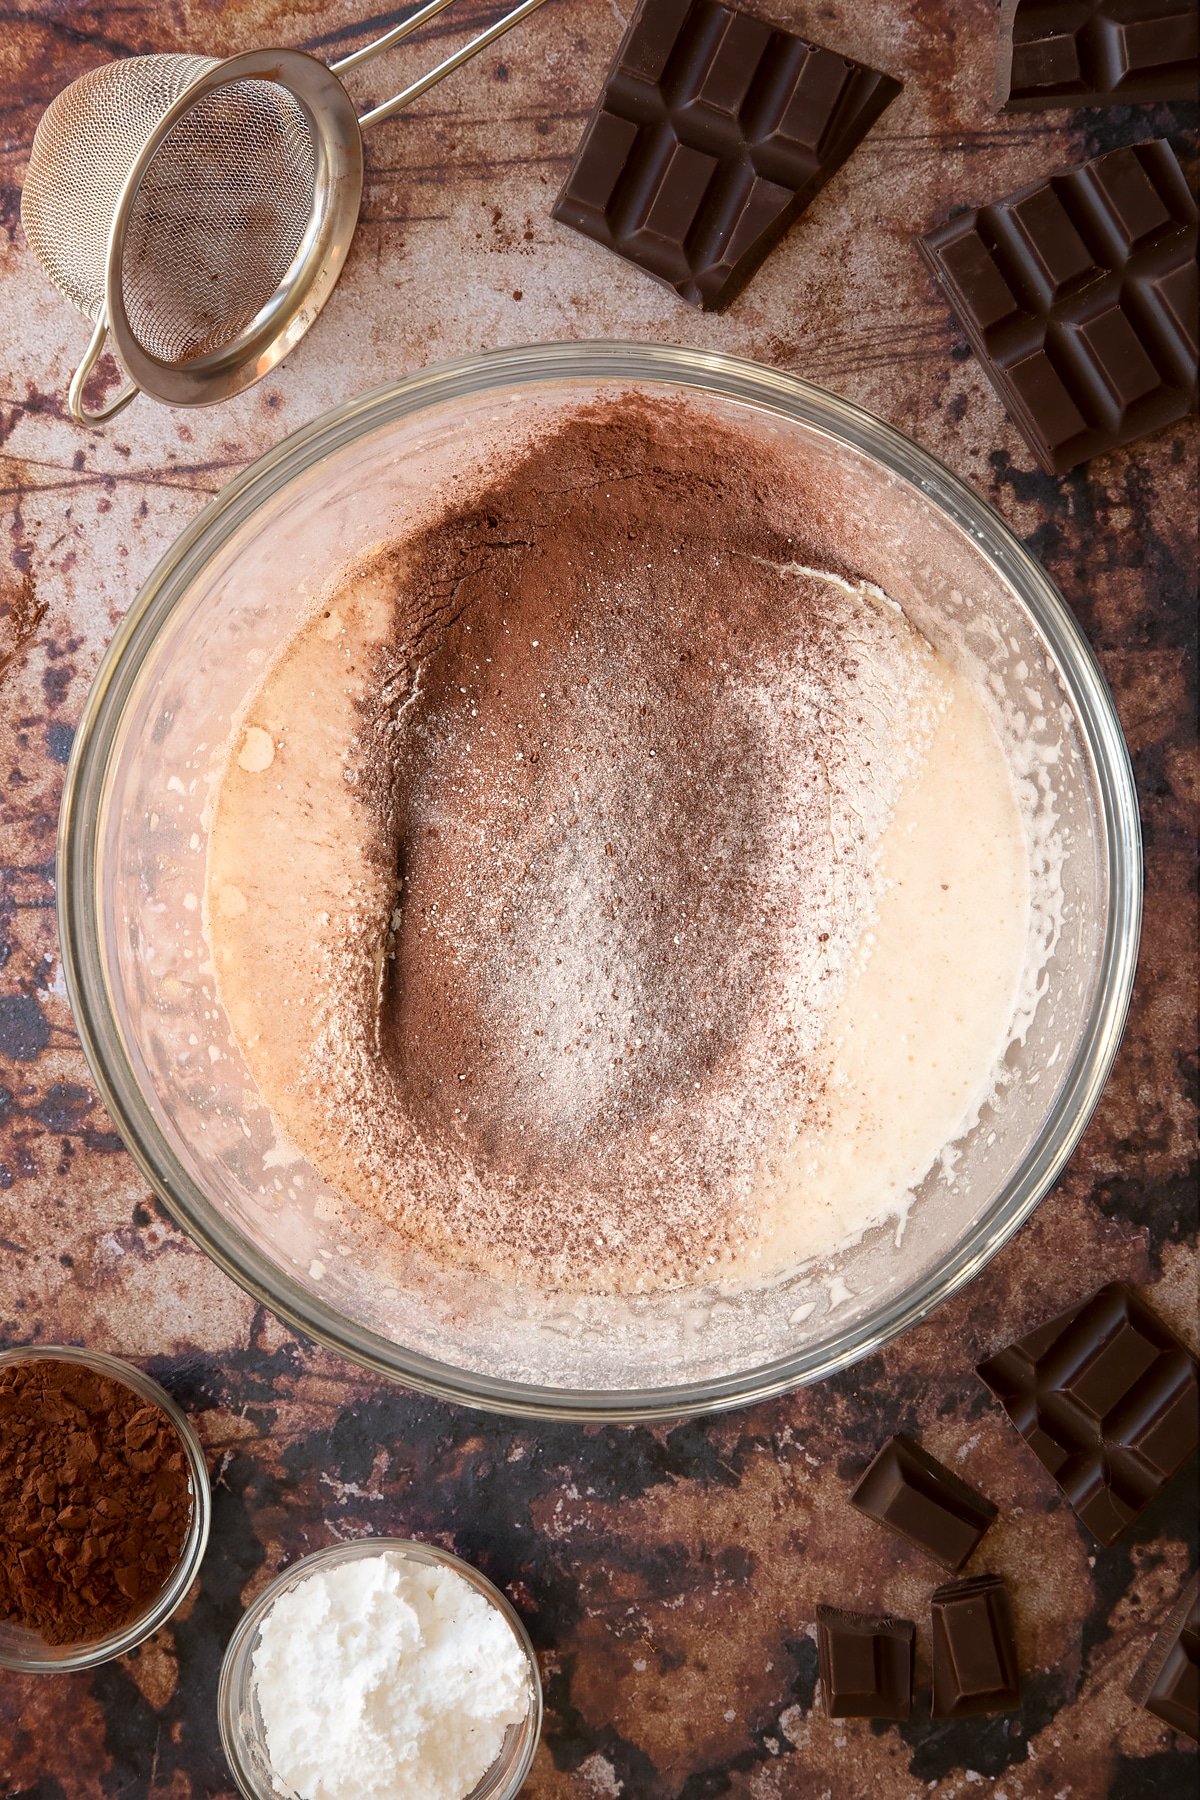 Whisked eggs and caster sugar with cocoa and flour in a glass mixing bowl. Ingredients for the caterpillar cake recipe surround the bowl.